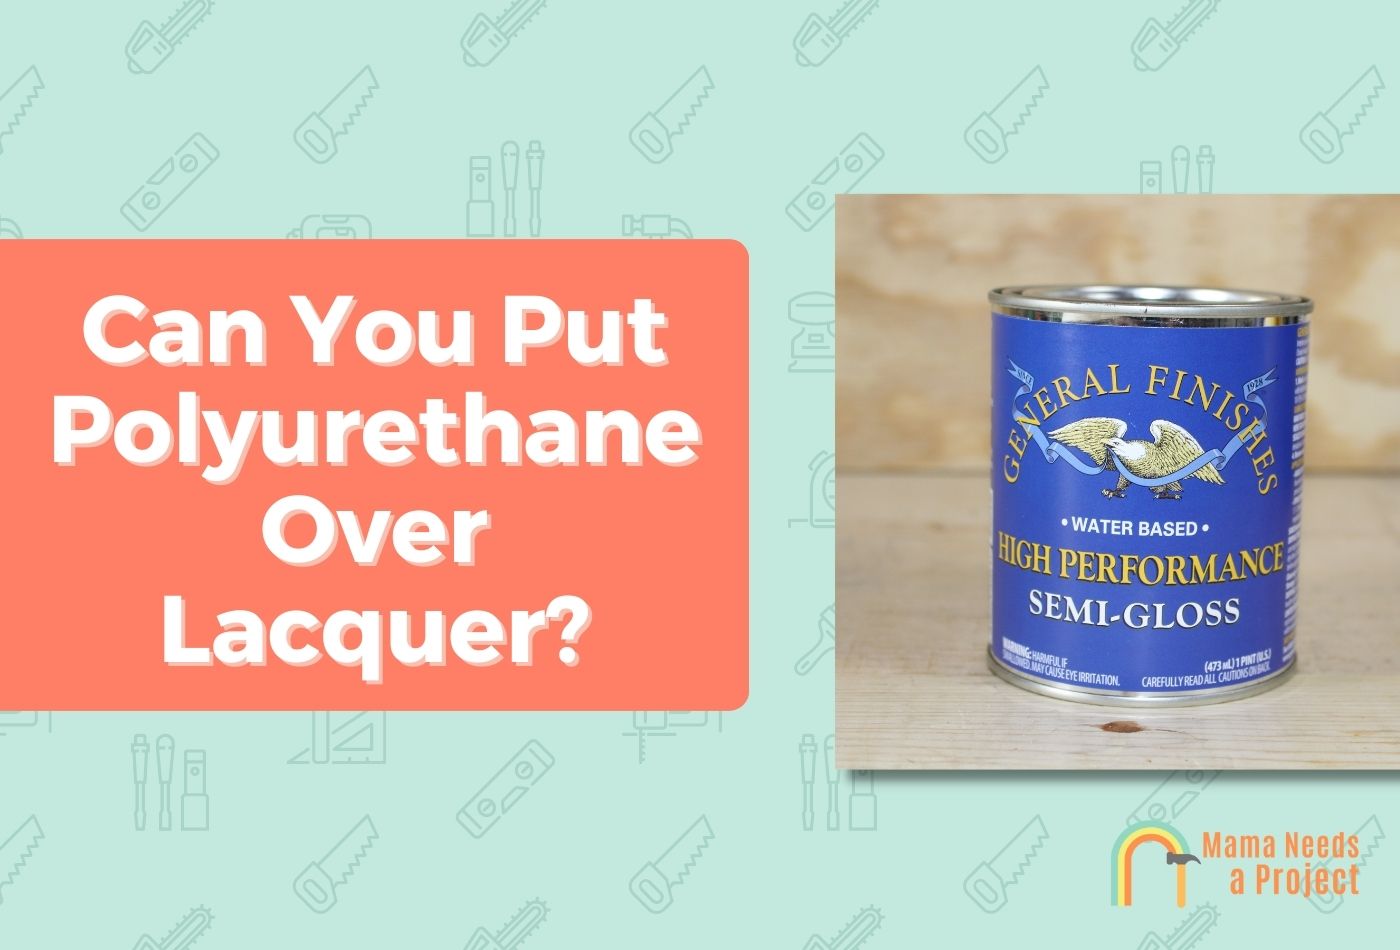 Can You Put Polyurethane Over Lacquer